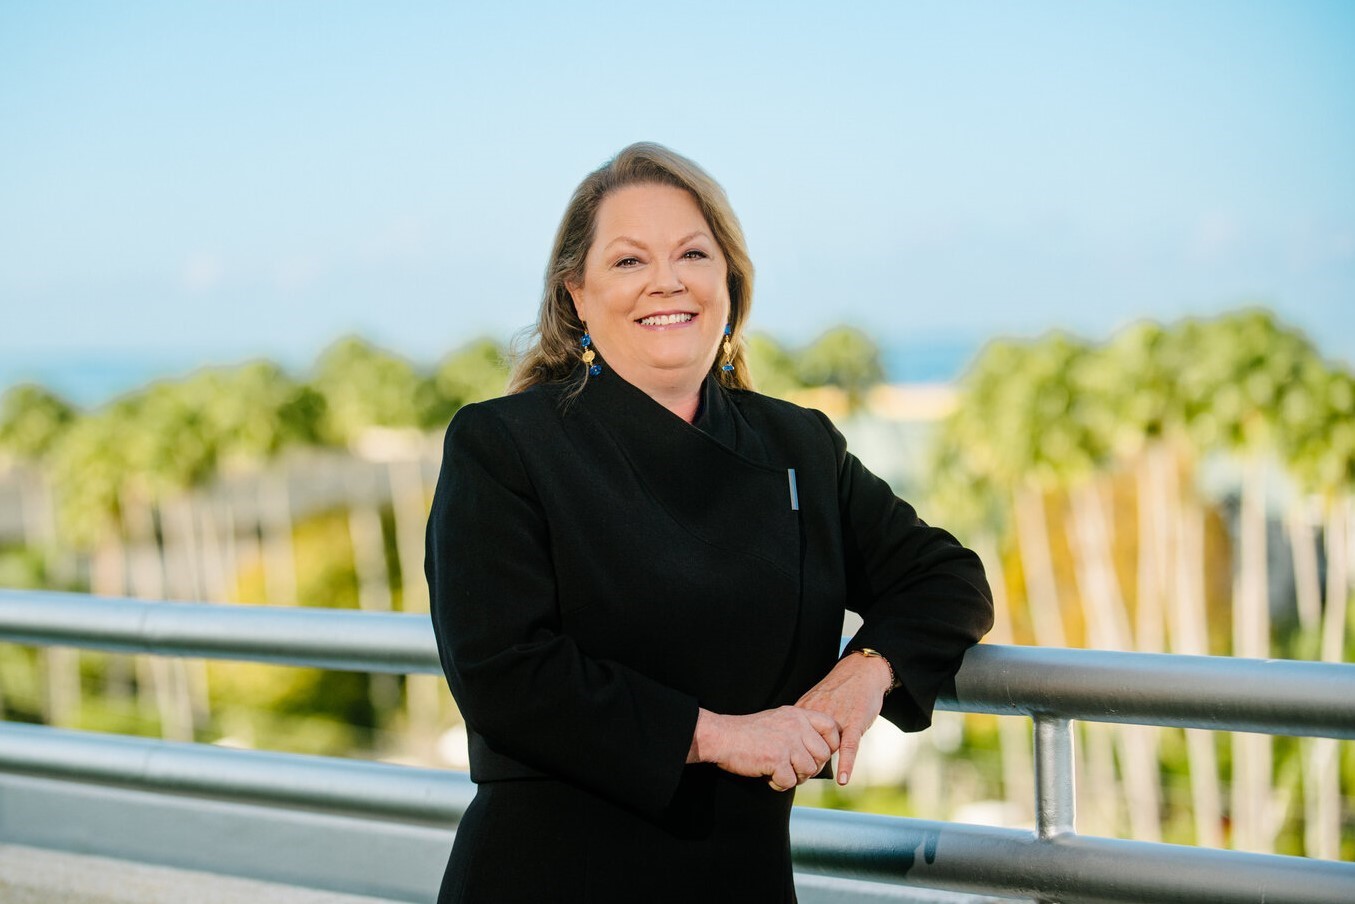 Courtesy. Frances Prockop has been named a partner at Hall Booth Smith's Tampa office.